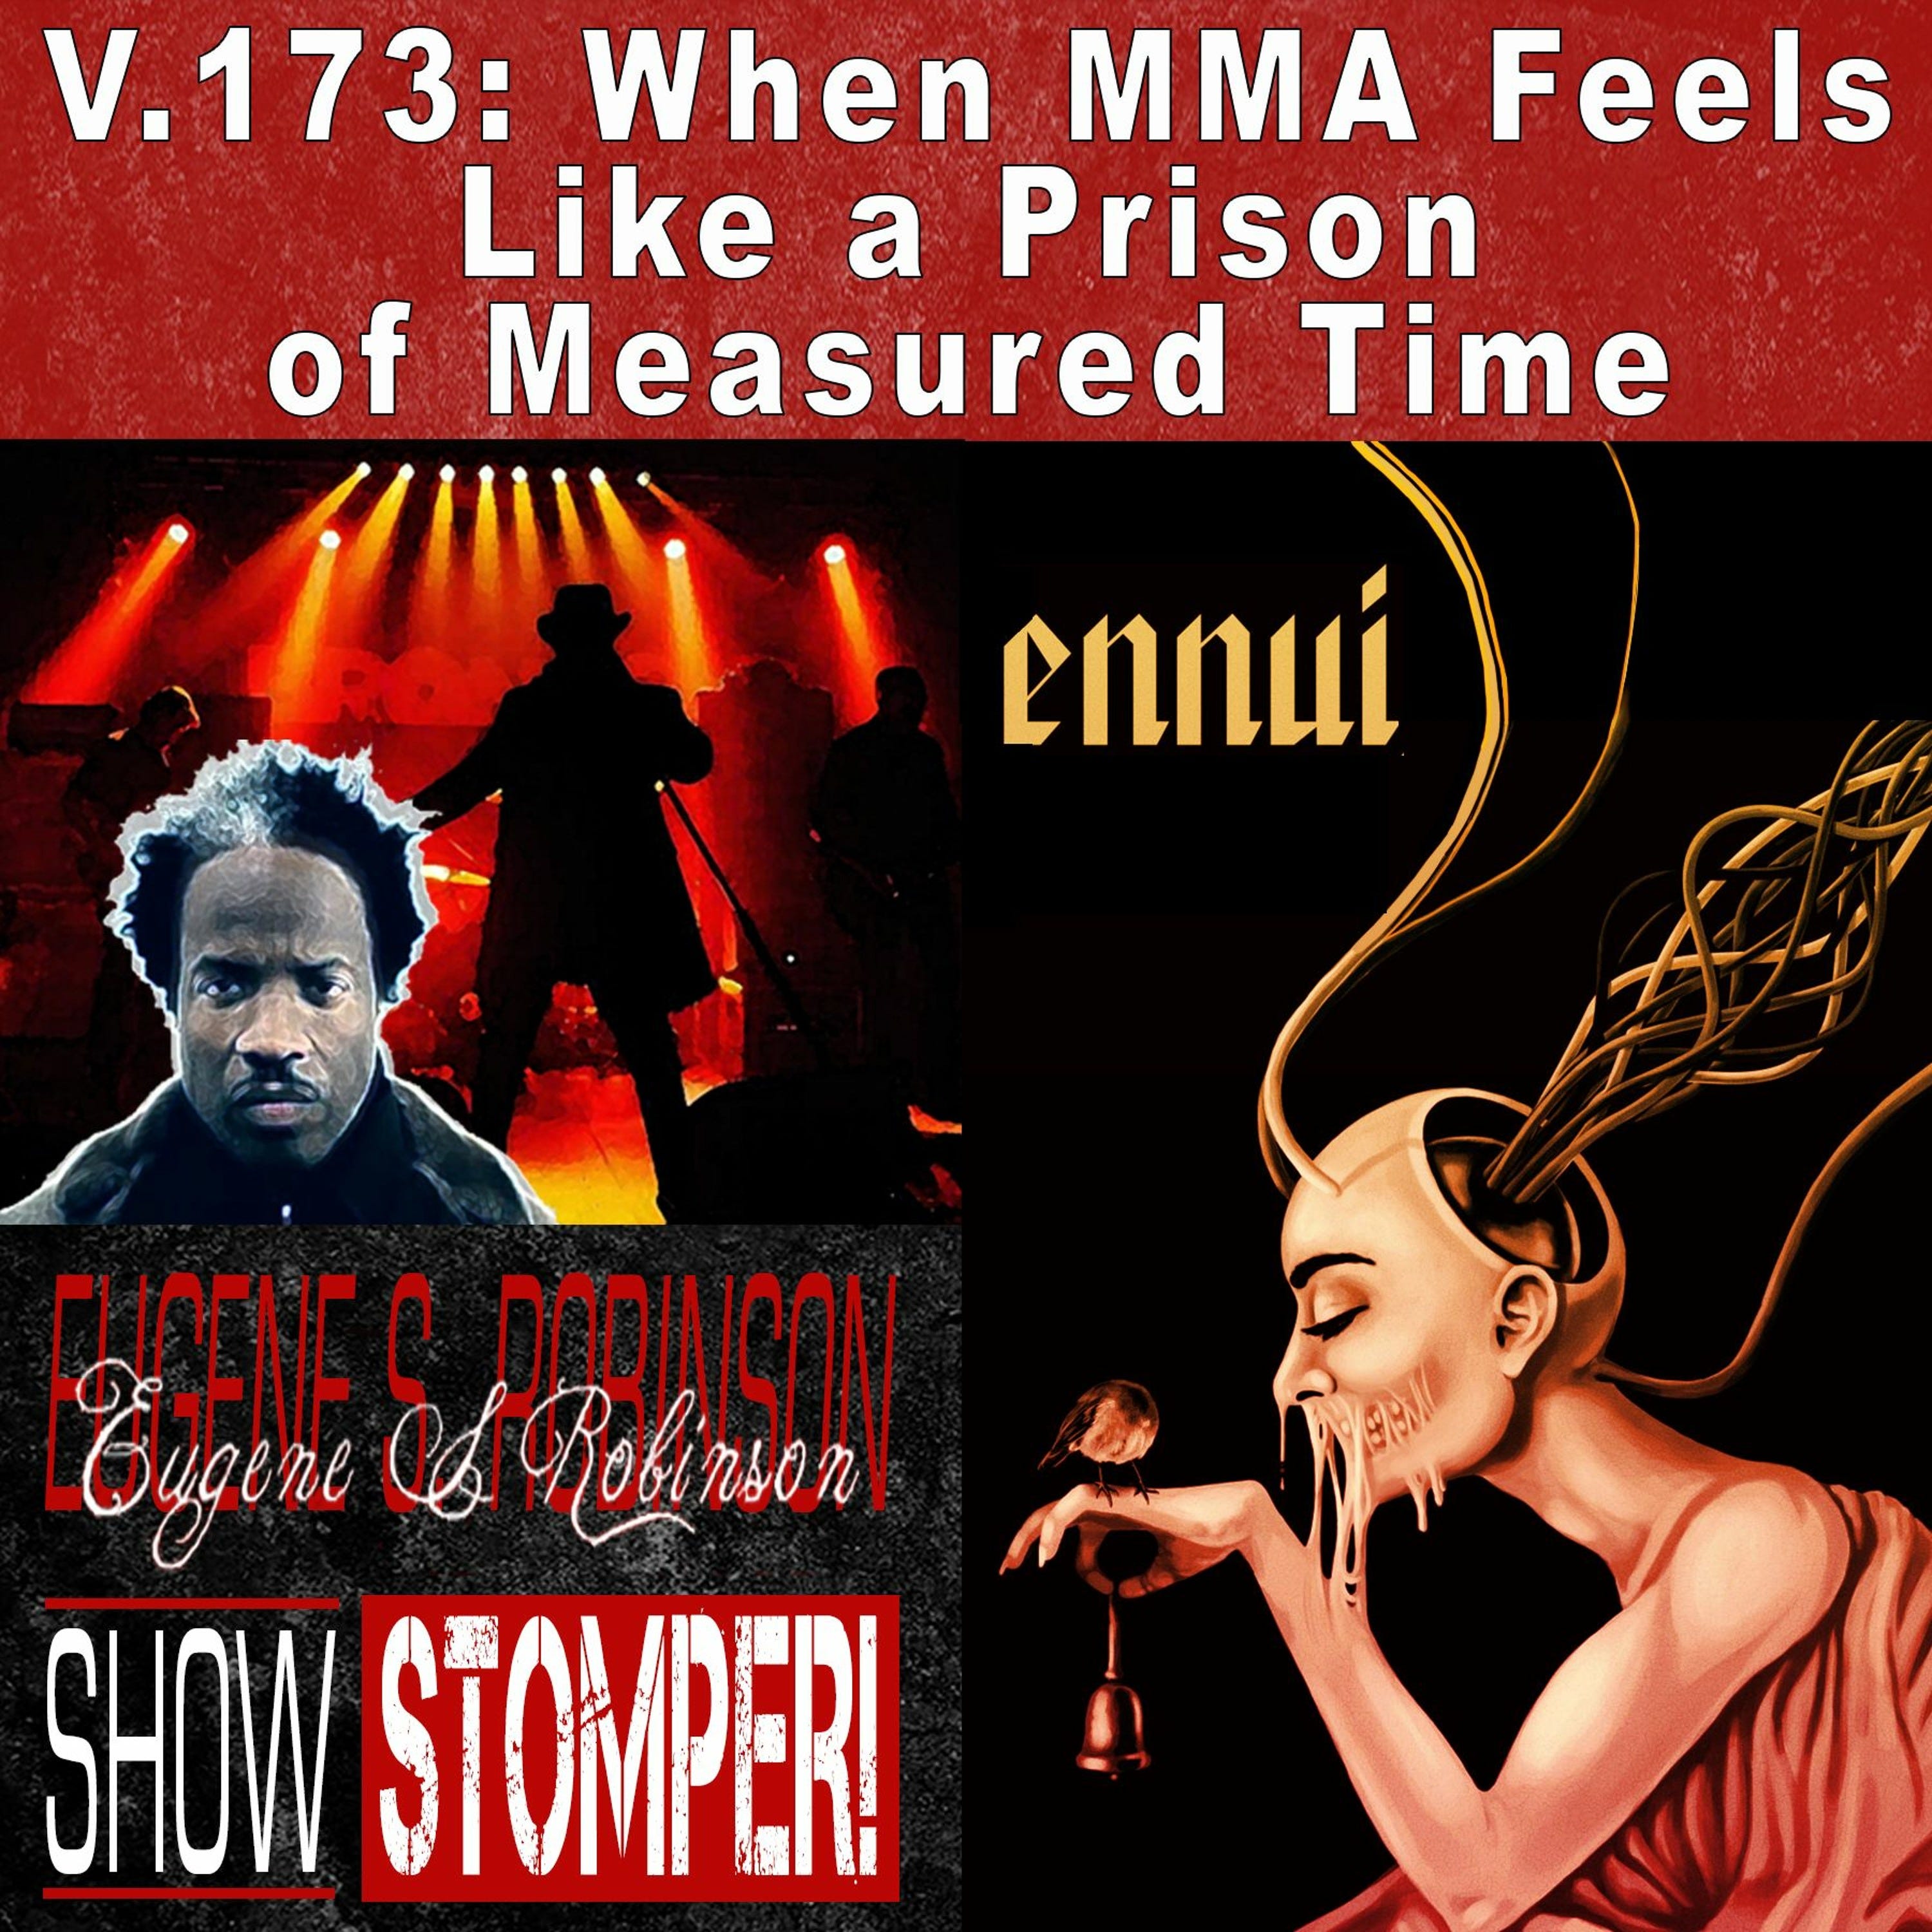 V.173 When MMA Feels Like A Prison Of Measured Time On The Eugene S. Robinson Show Stomper!